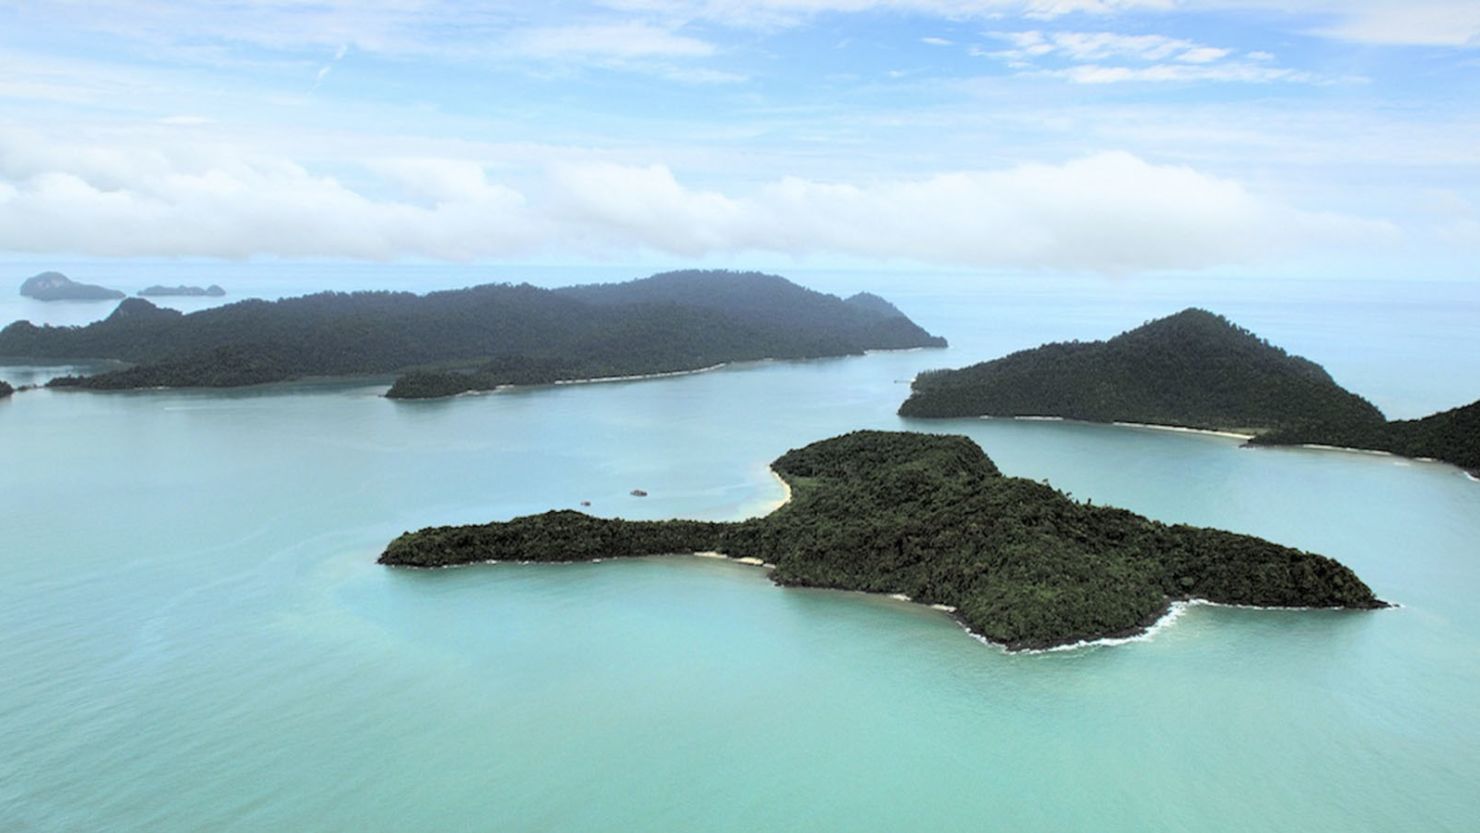 Have boat, will island-hop. Langkawi is surrounded by about 100 islets that can be explored on a day trip.